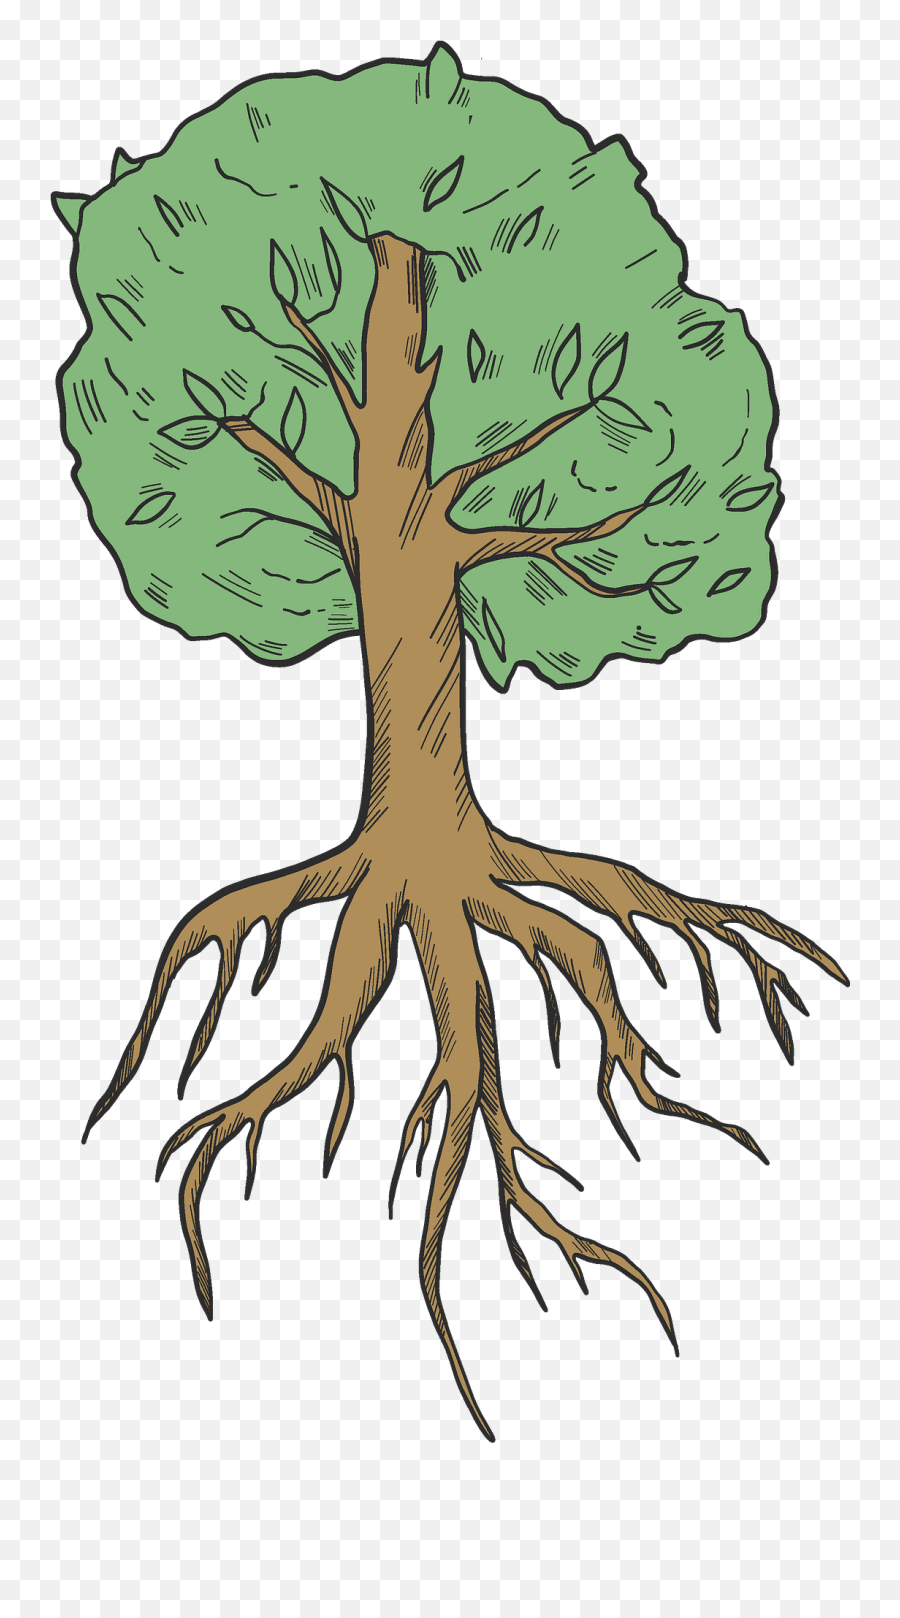 Tree With Roots Clipart - Tree With 5 Roots Clip Art Png,Tree With Roots Png